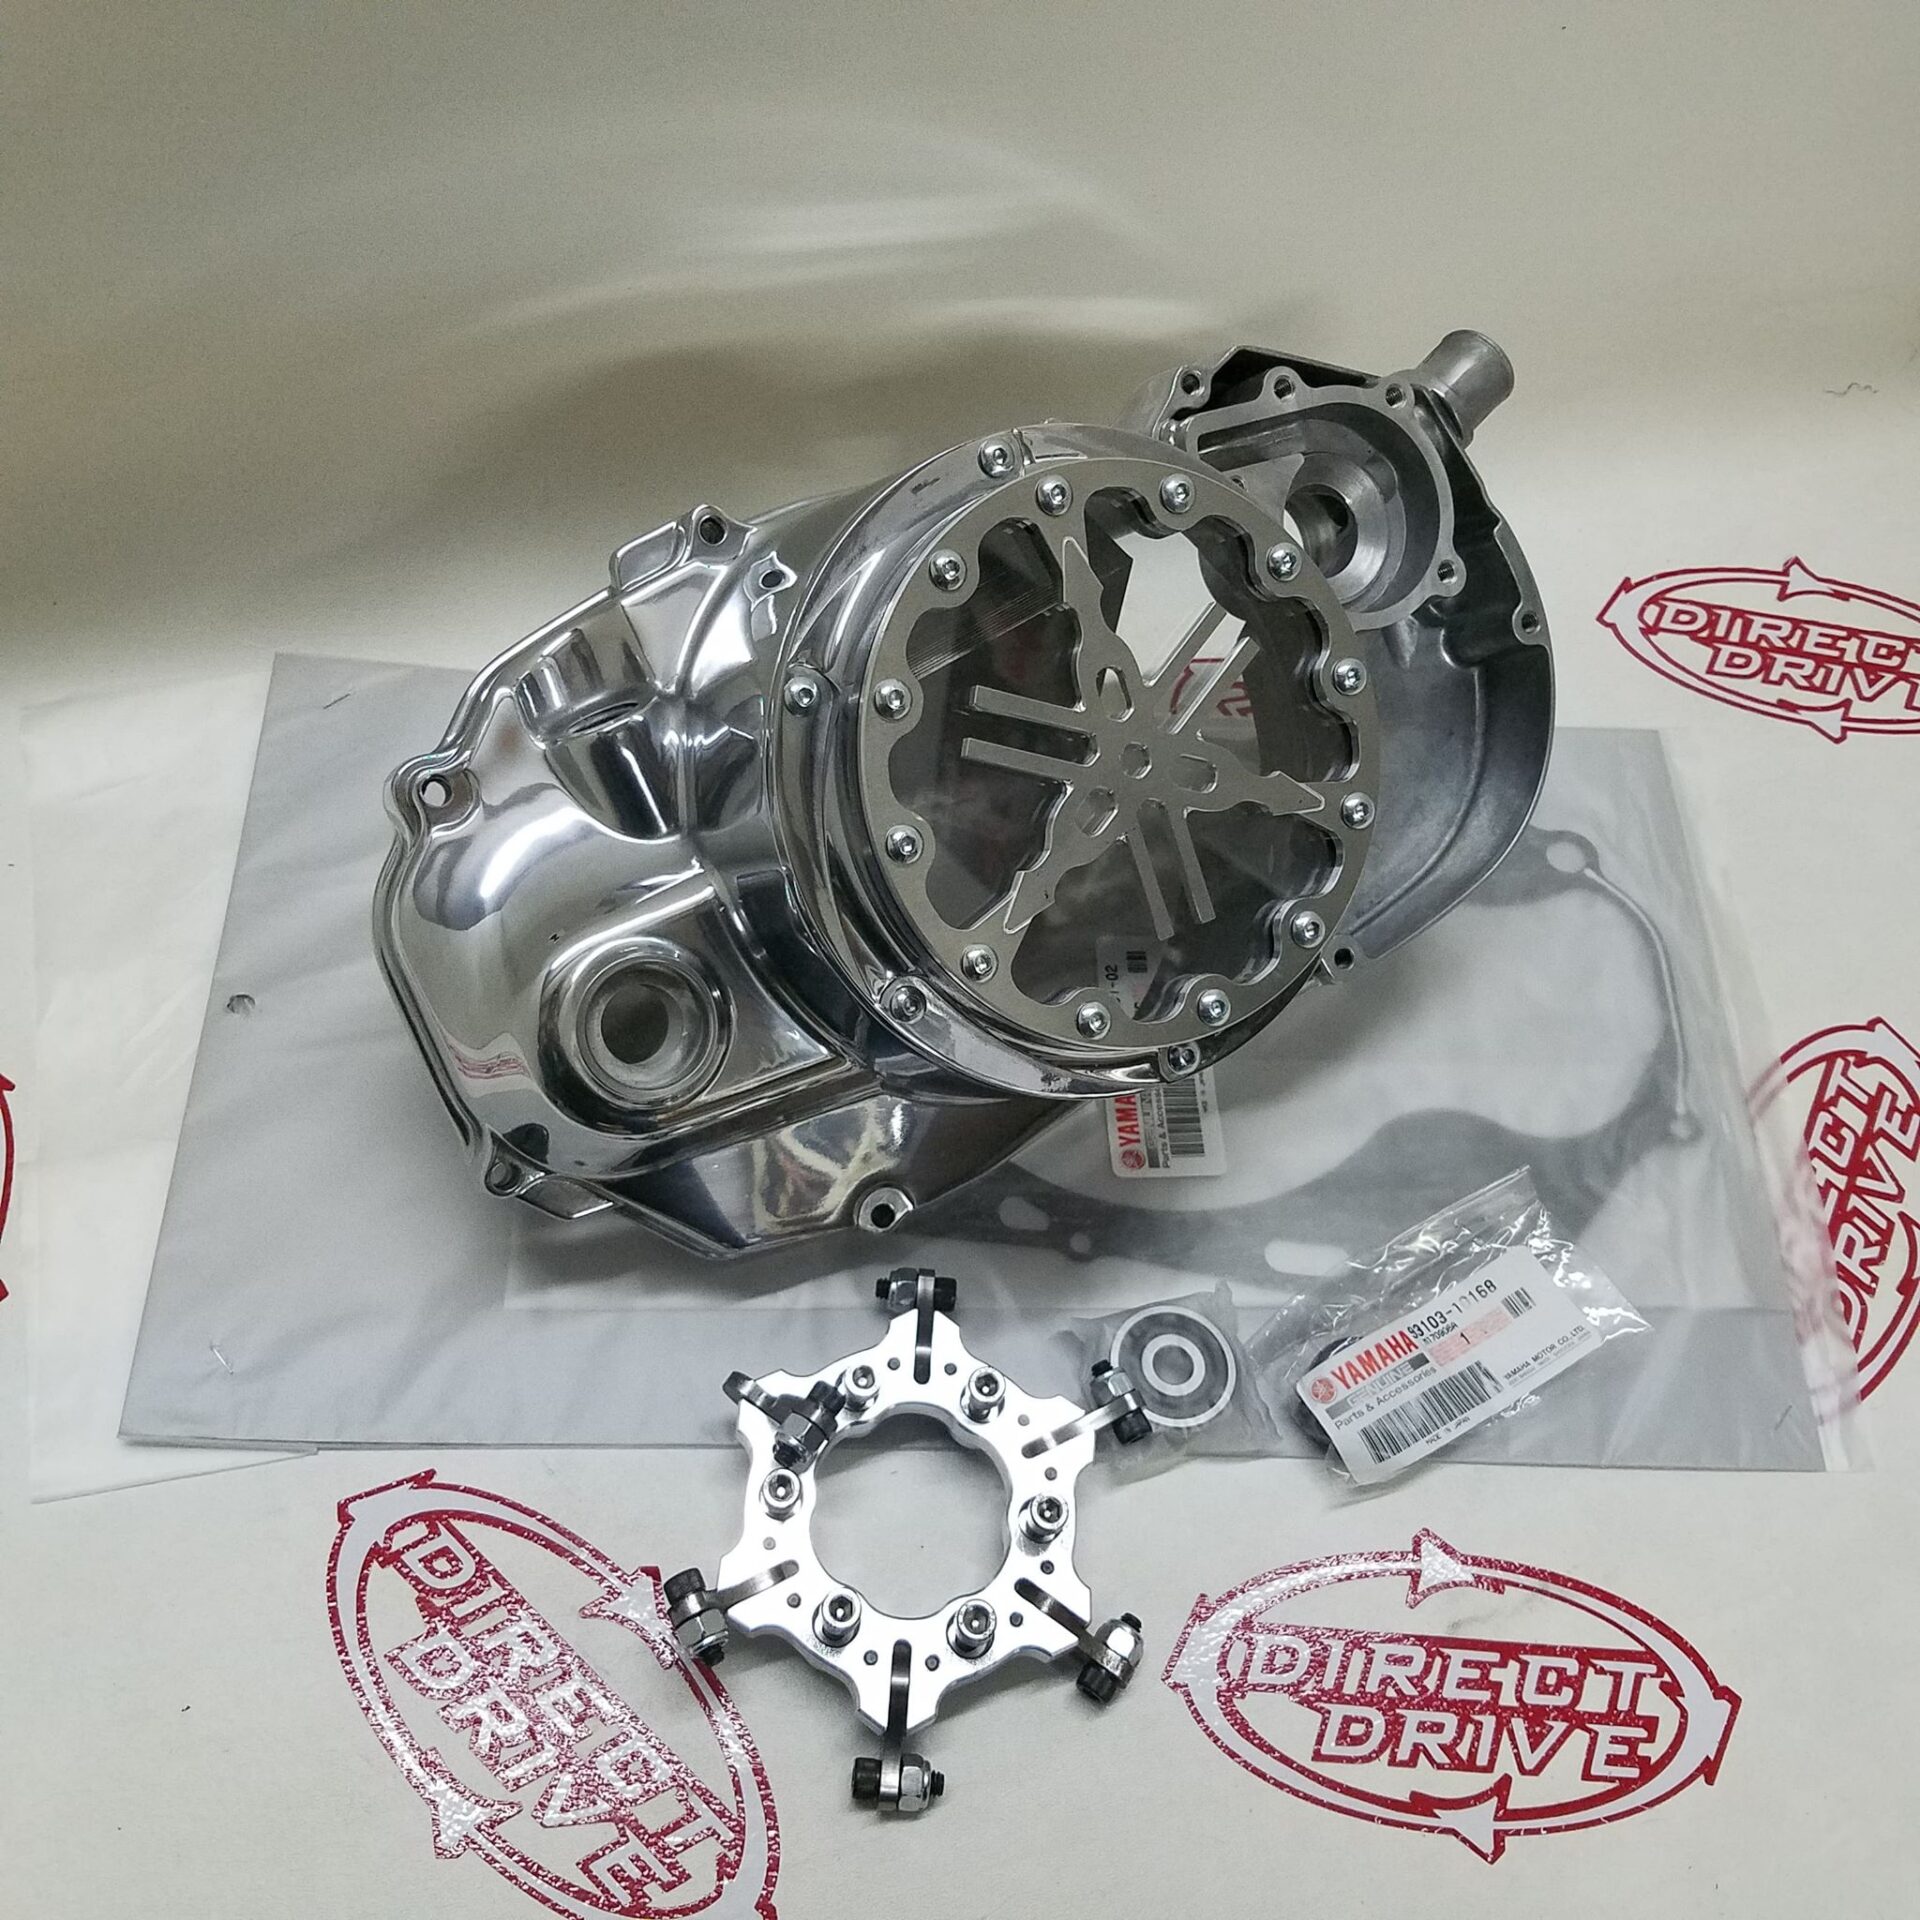 Banshee Clutch Cover Kit With Silver Lockout Gasket